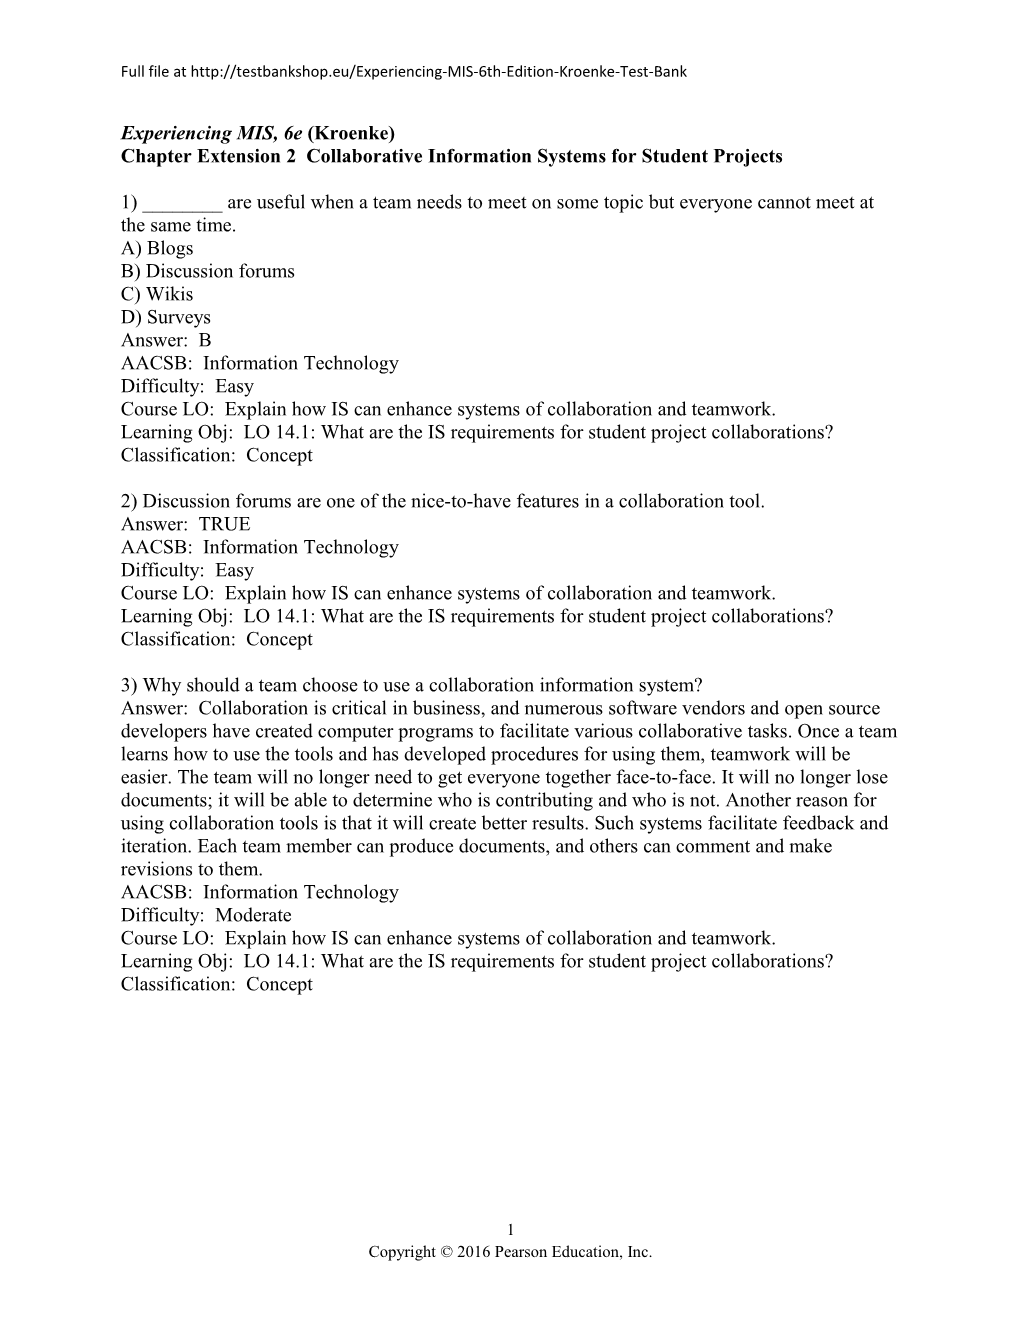 Chapter Extension 2 Collaborative Information Systems for Student Projects